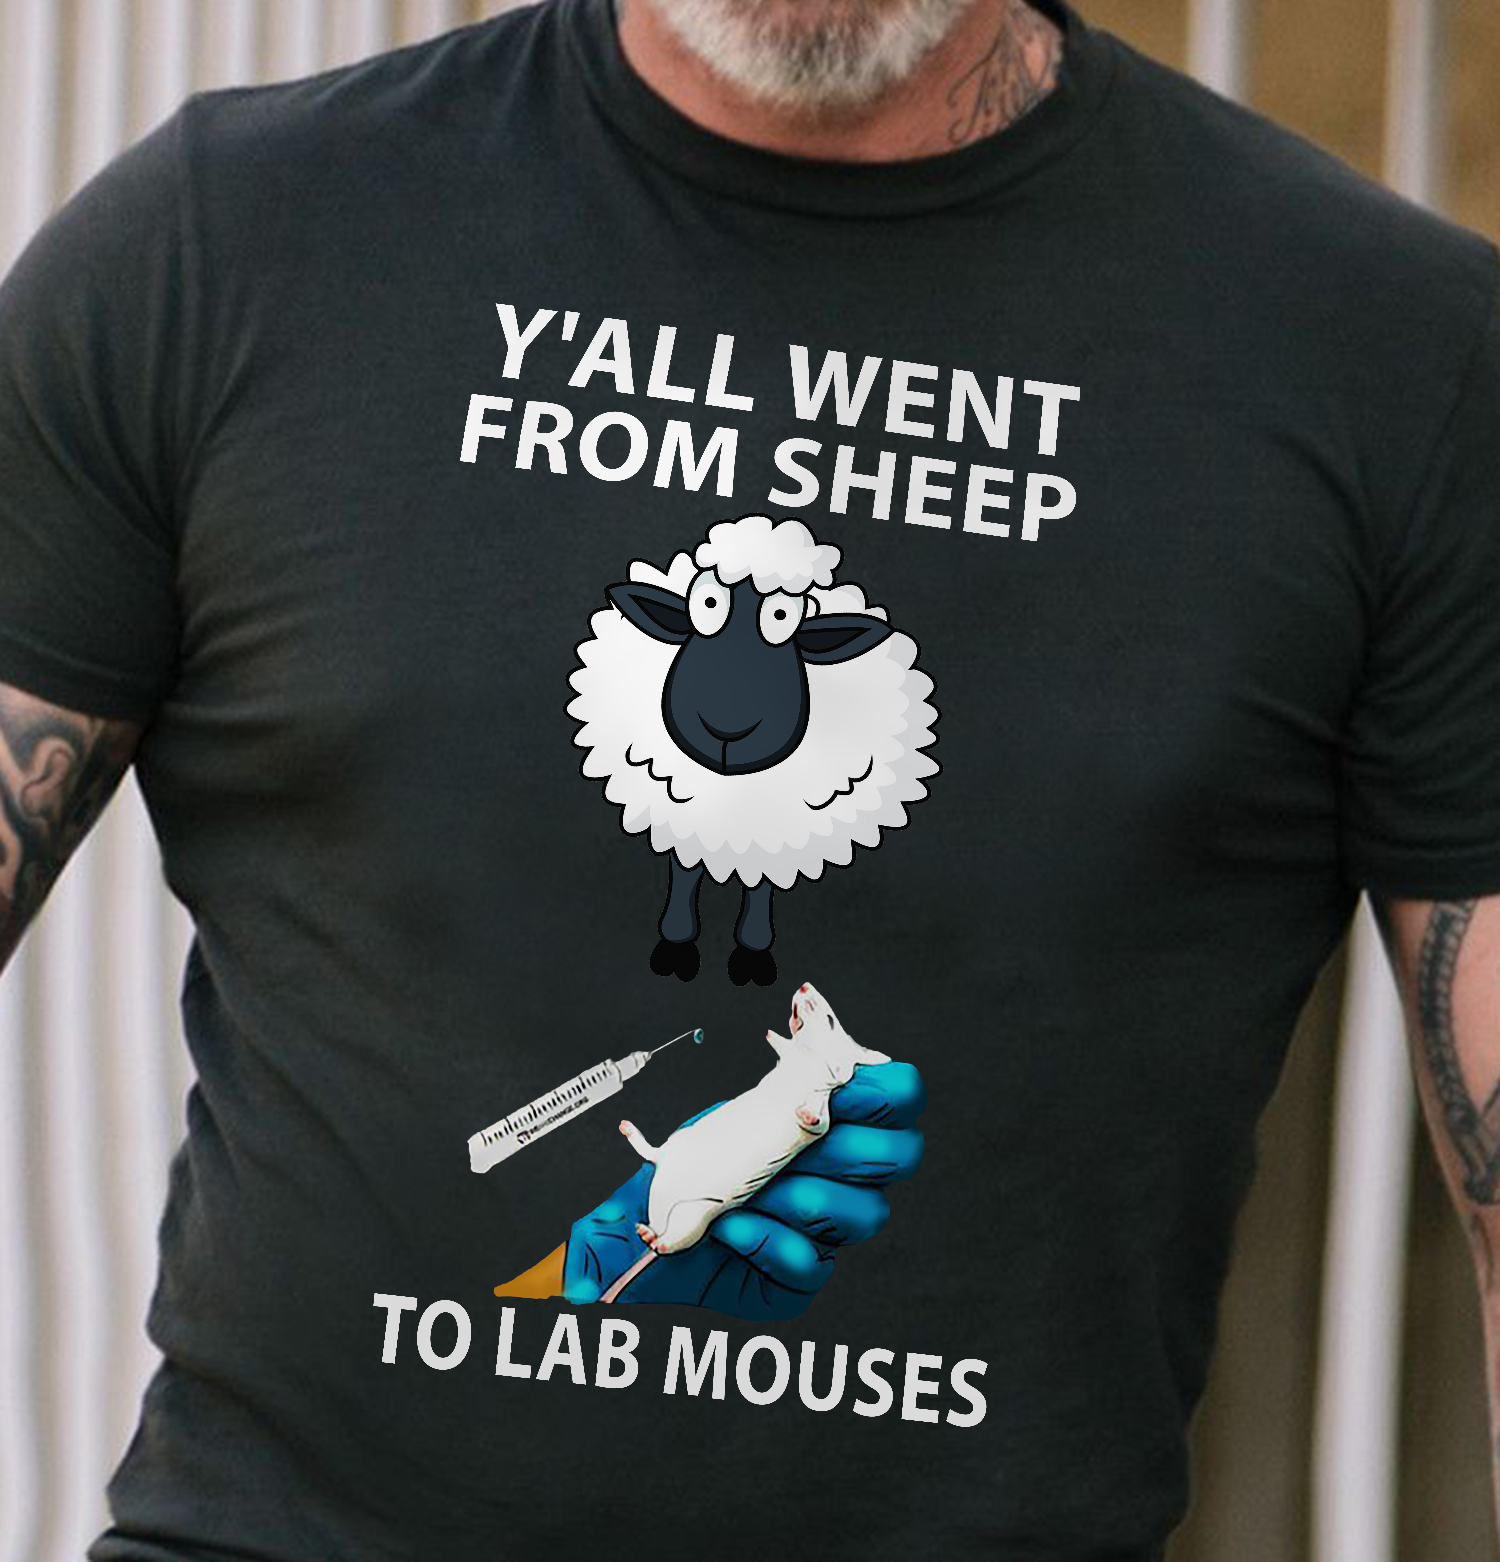 Y'all went from sheep to lab mouses - White rat for science